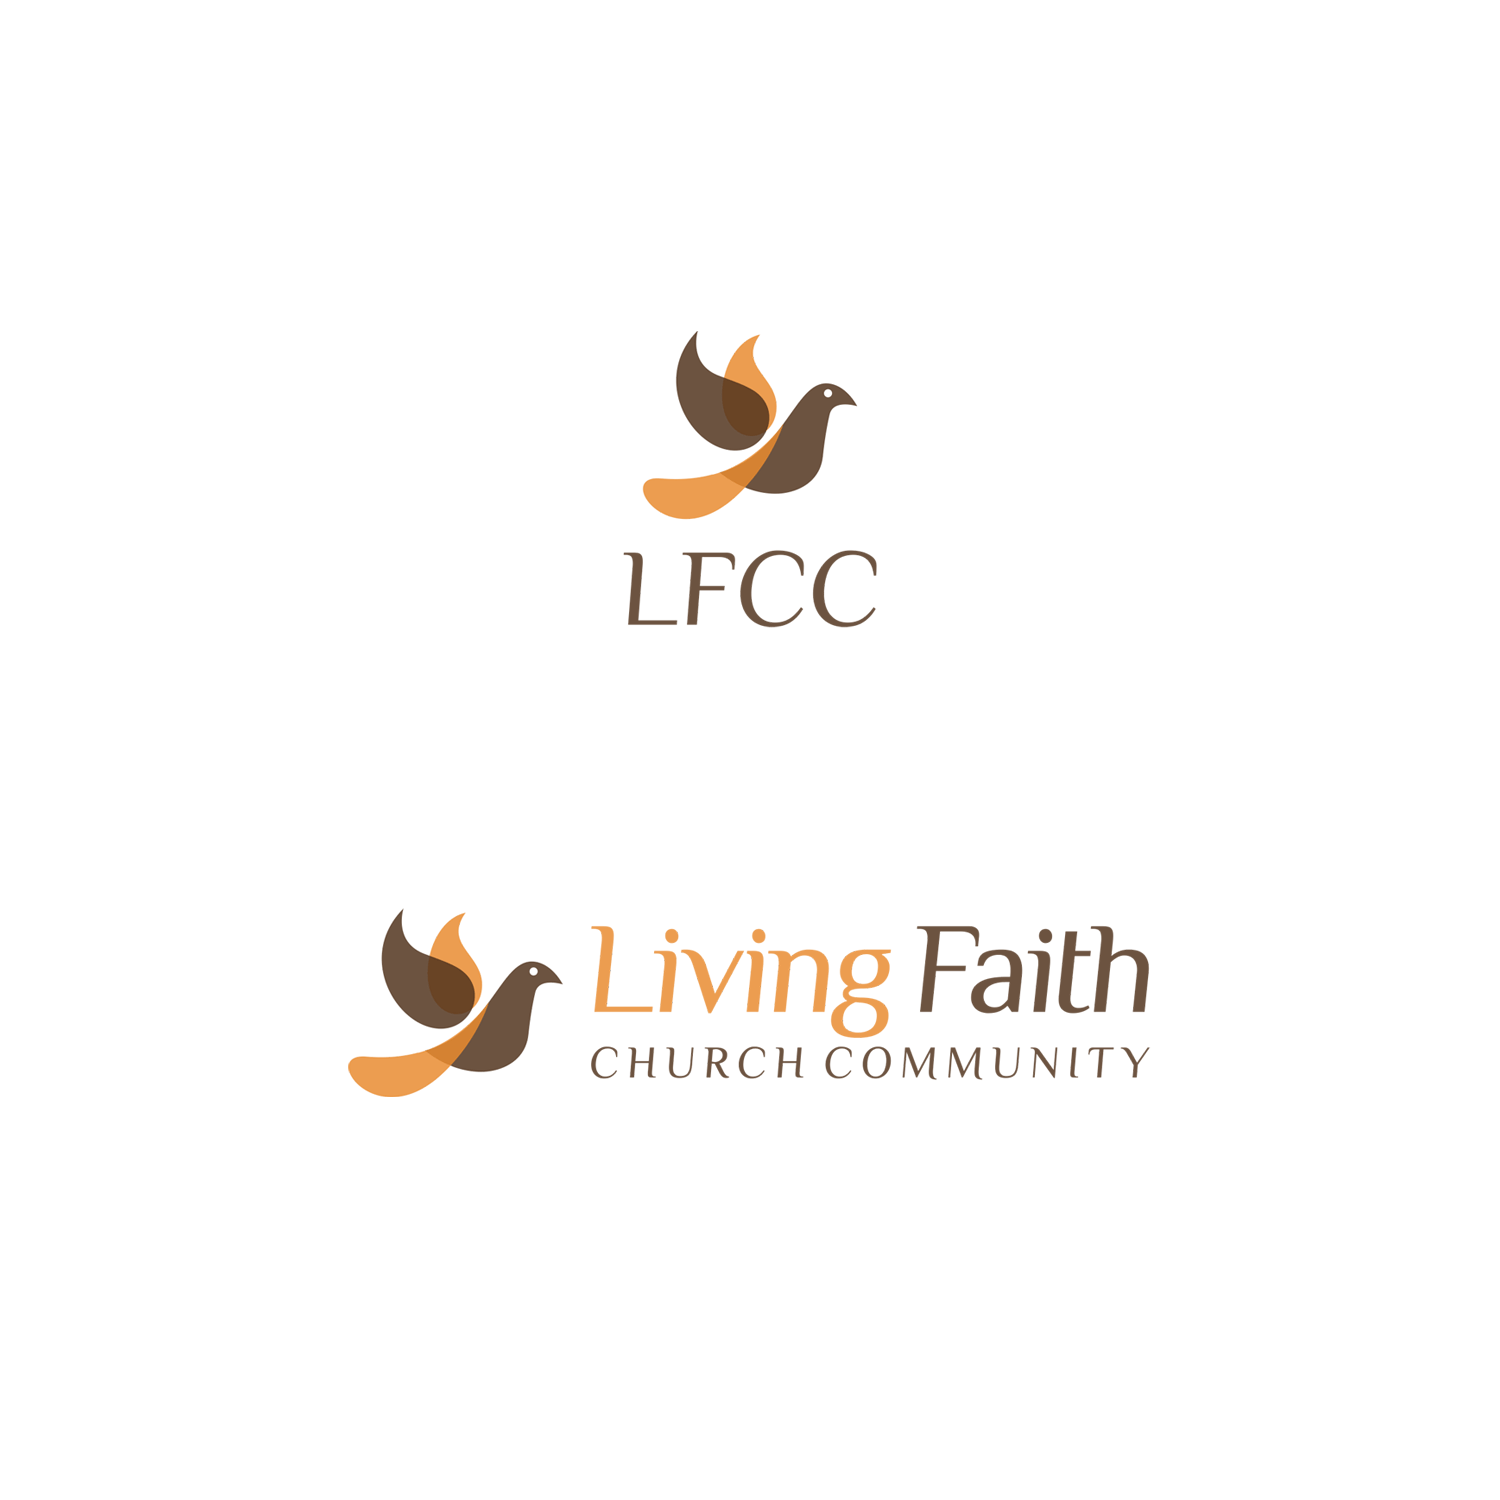 Brown Dove Logo - Church Logos for Christian Apps and Organizations